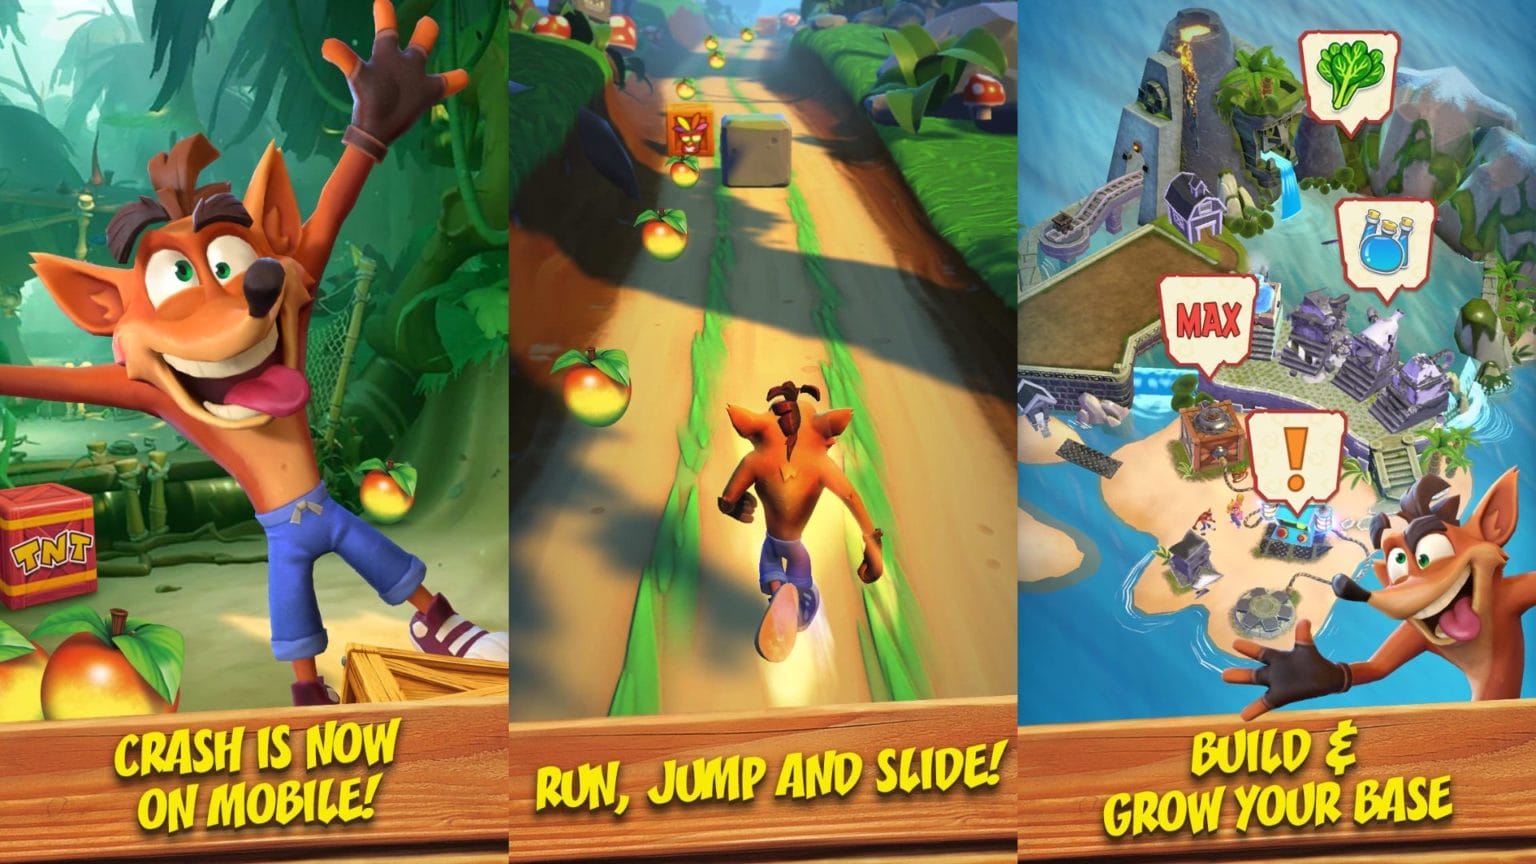 Crash Bandicoot is getting his first new mobile game in 10 years